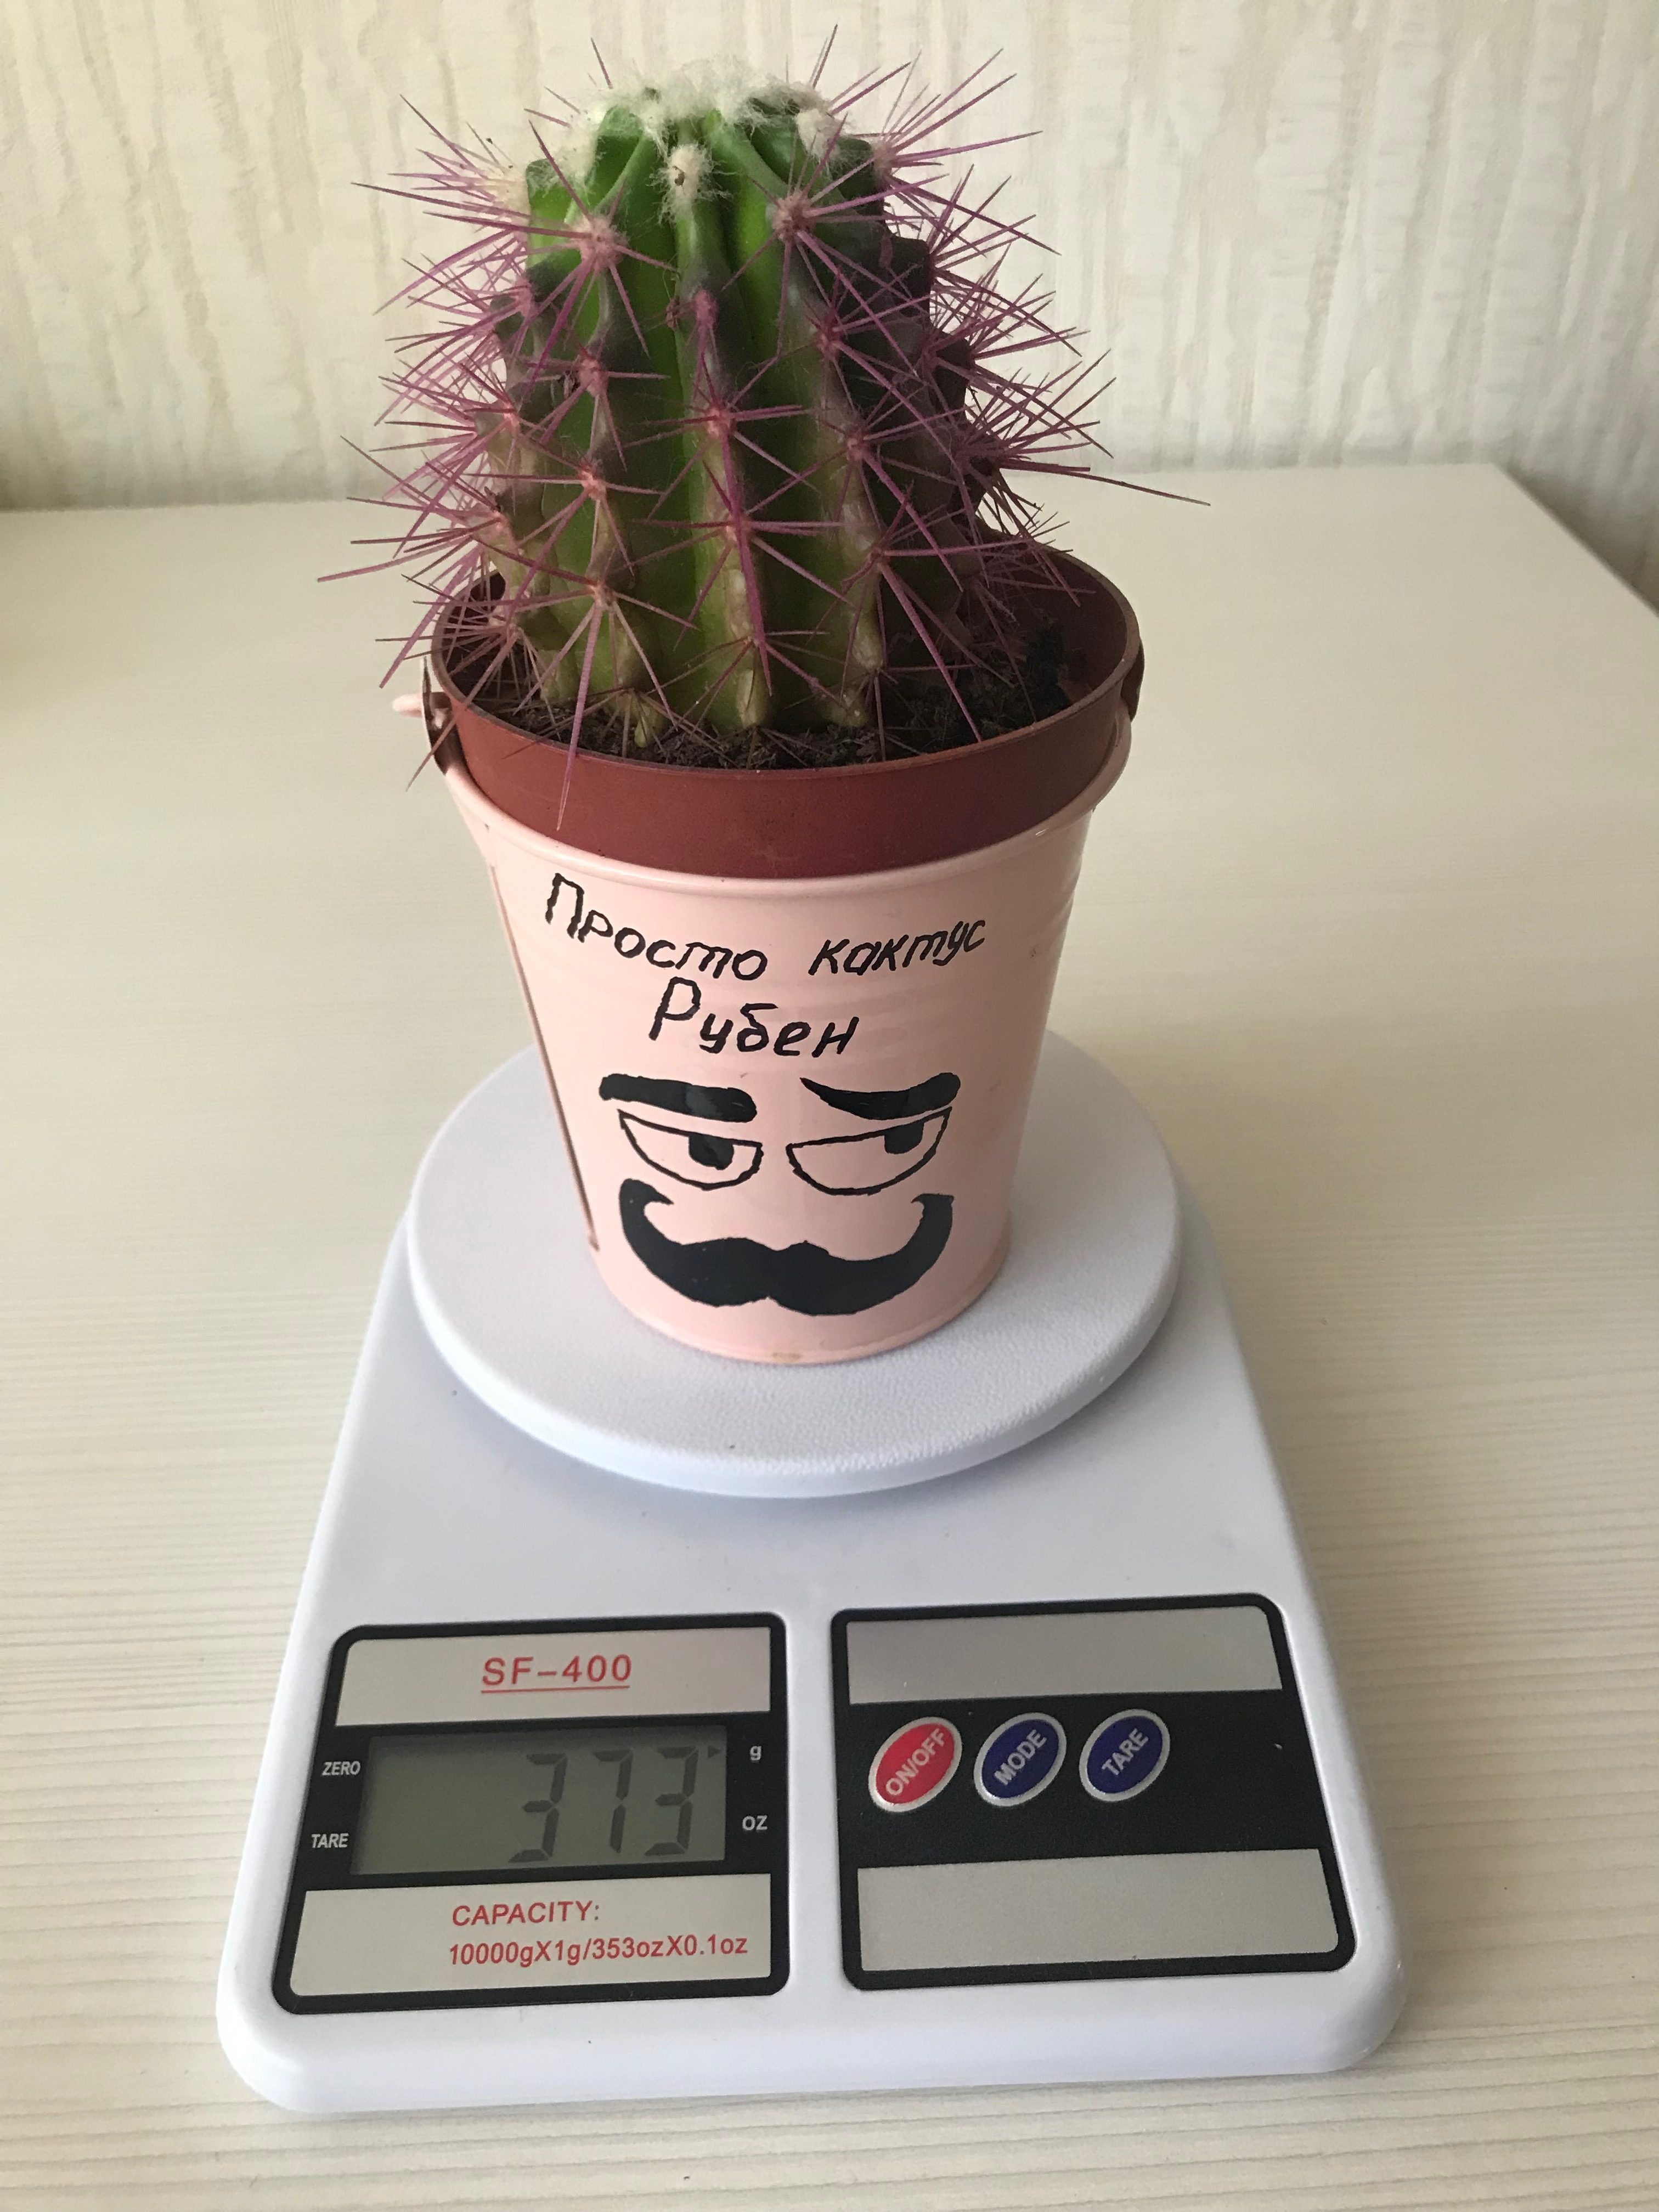 the weight of the cactus in the bucket